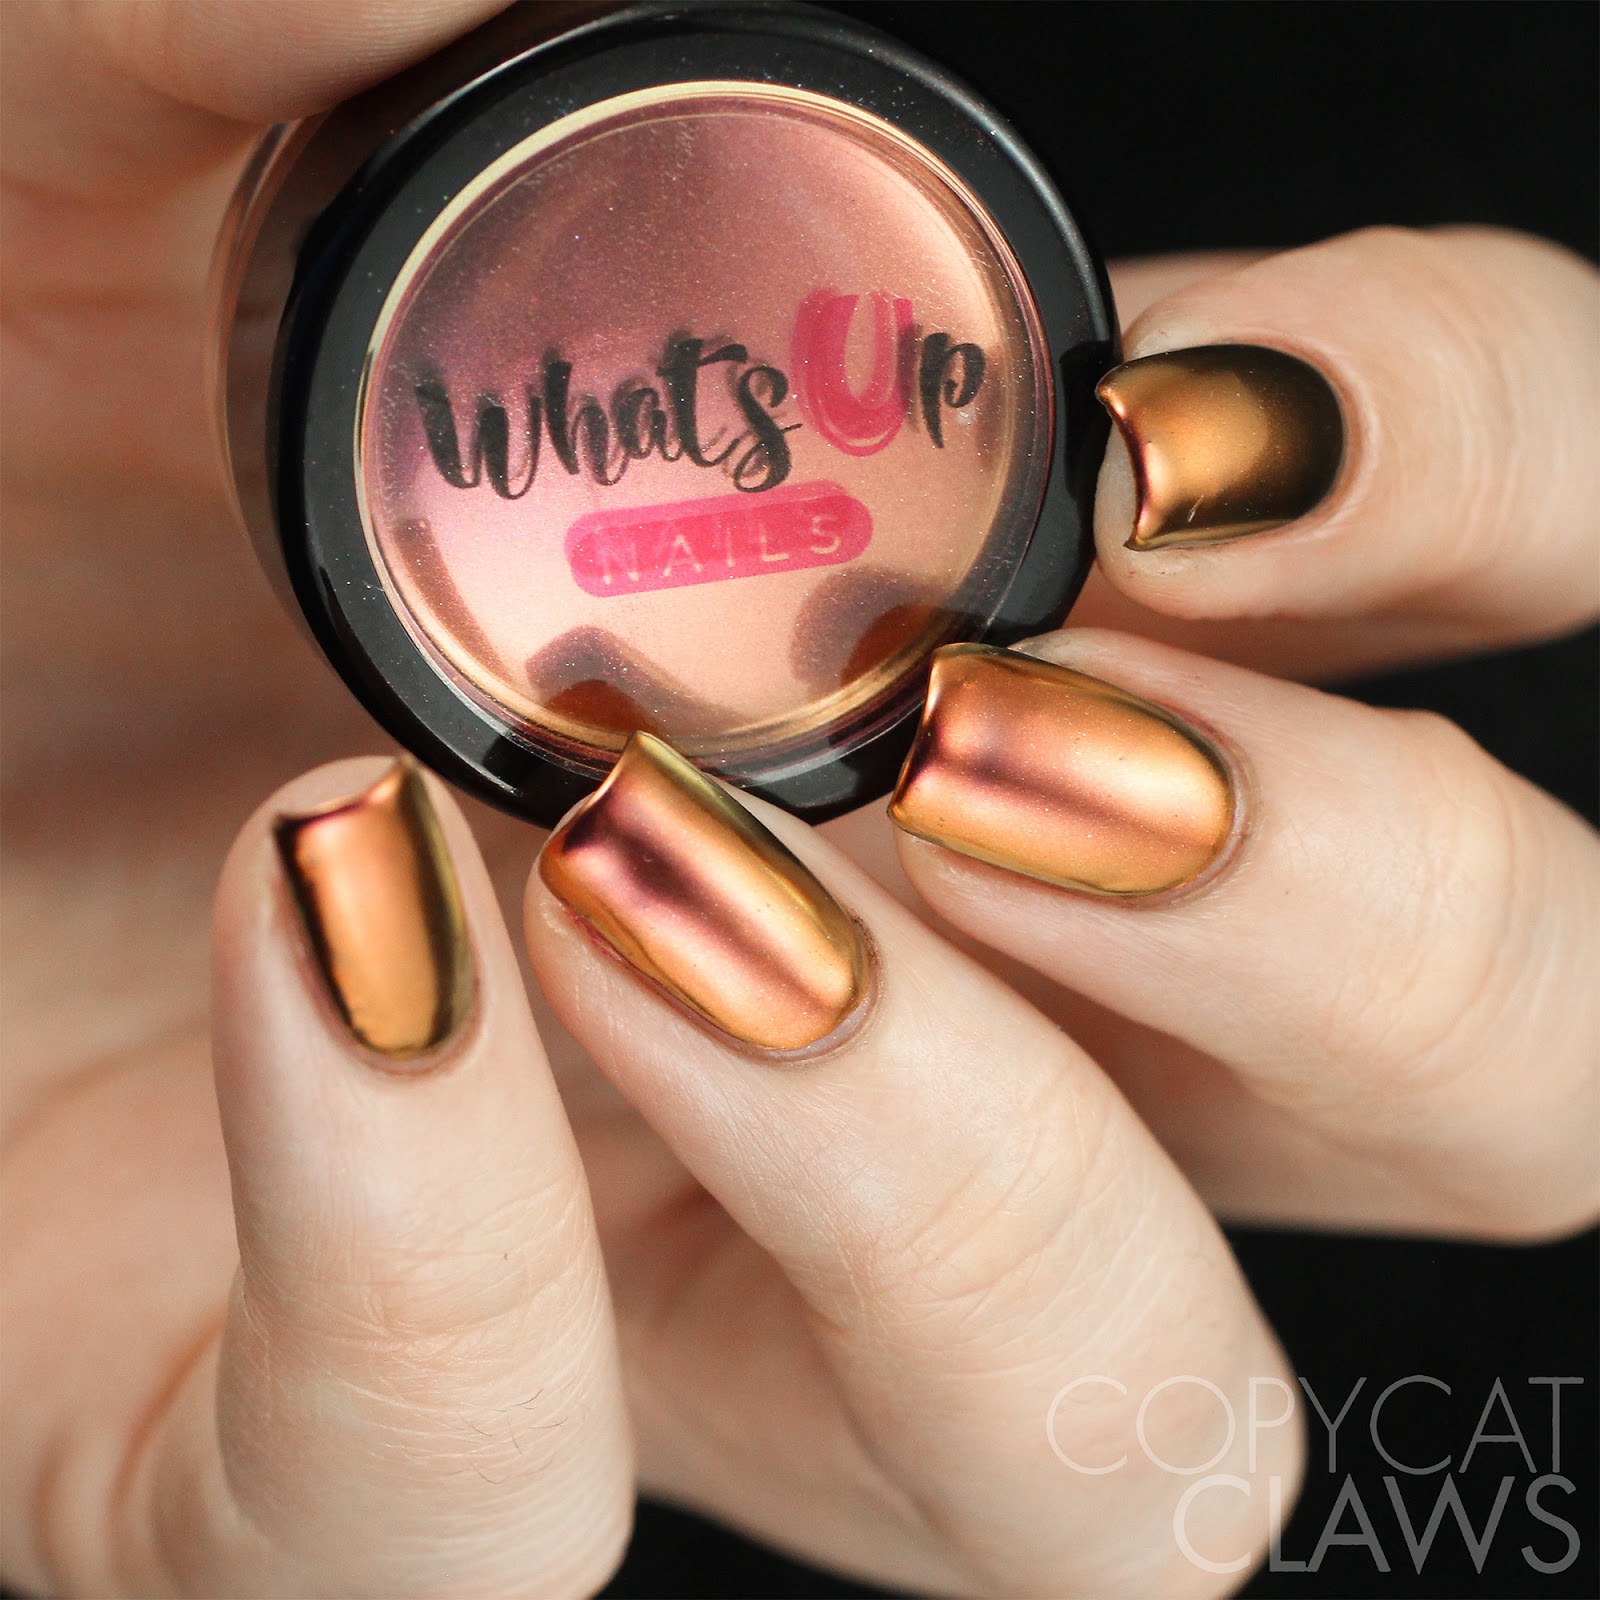 Copycat Claws: Whats Up Nails Sunset Powder and Stencils